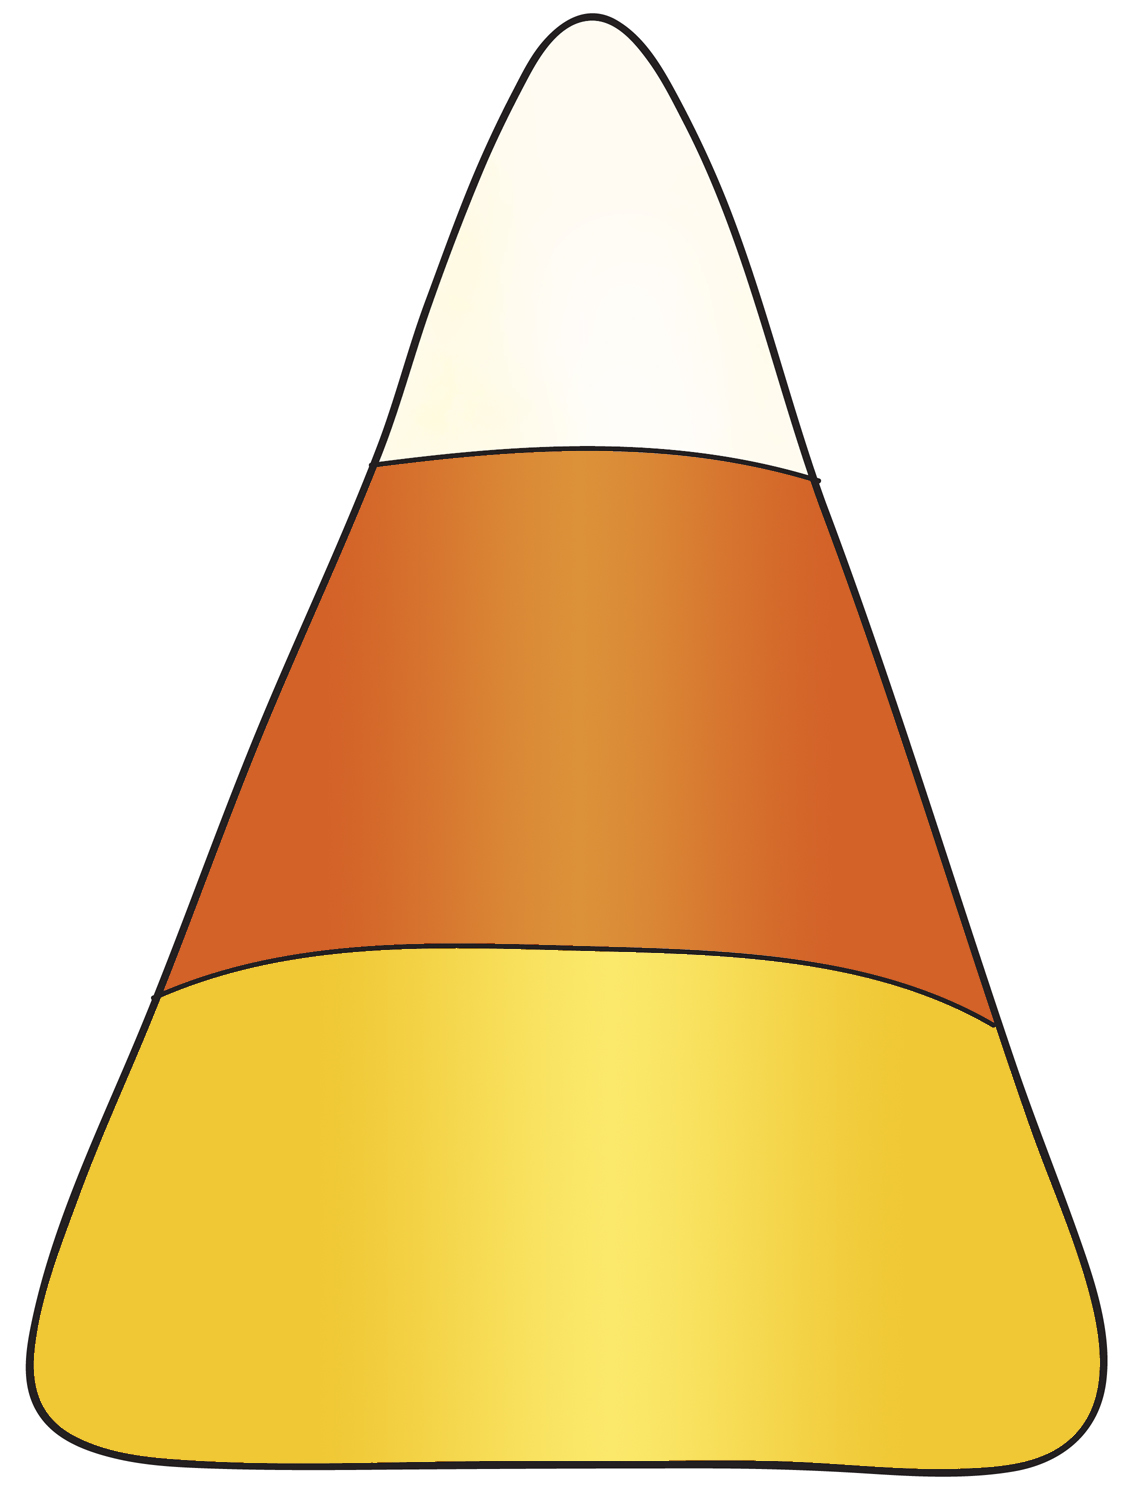 Wallpapers For > Candy Corn Background Clip Art